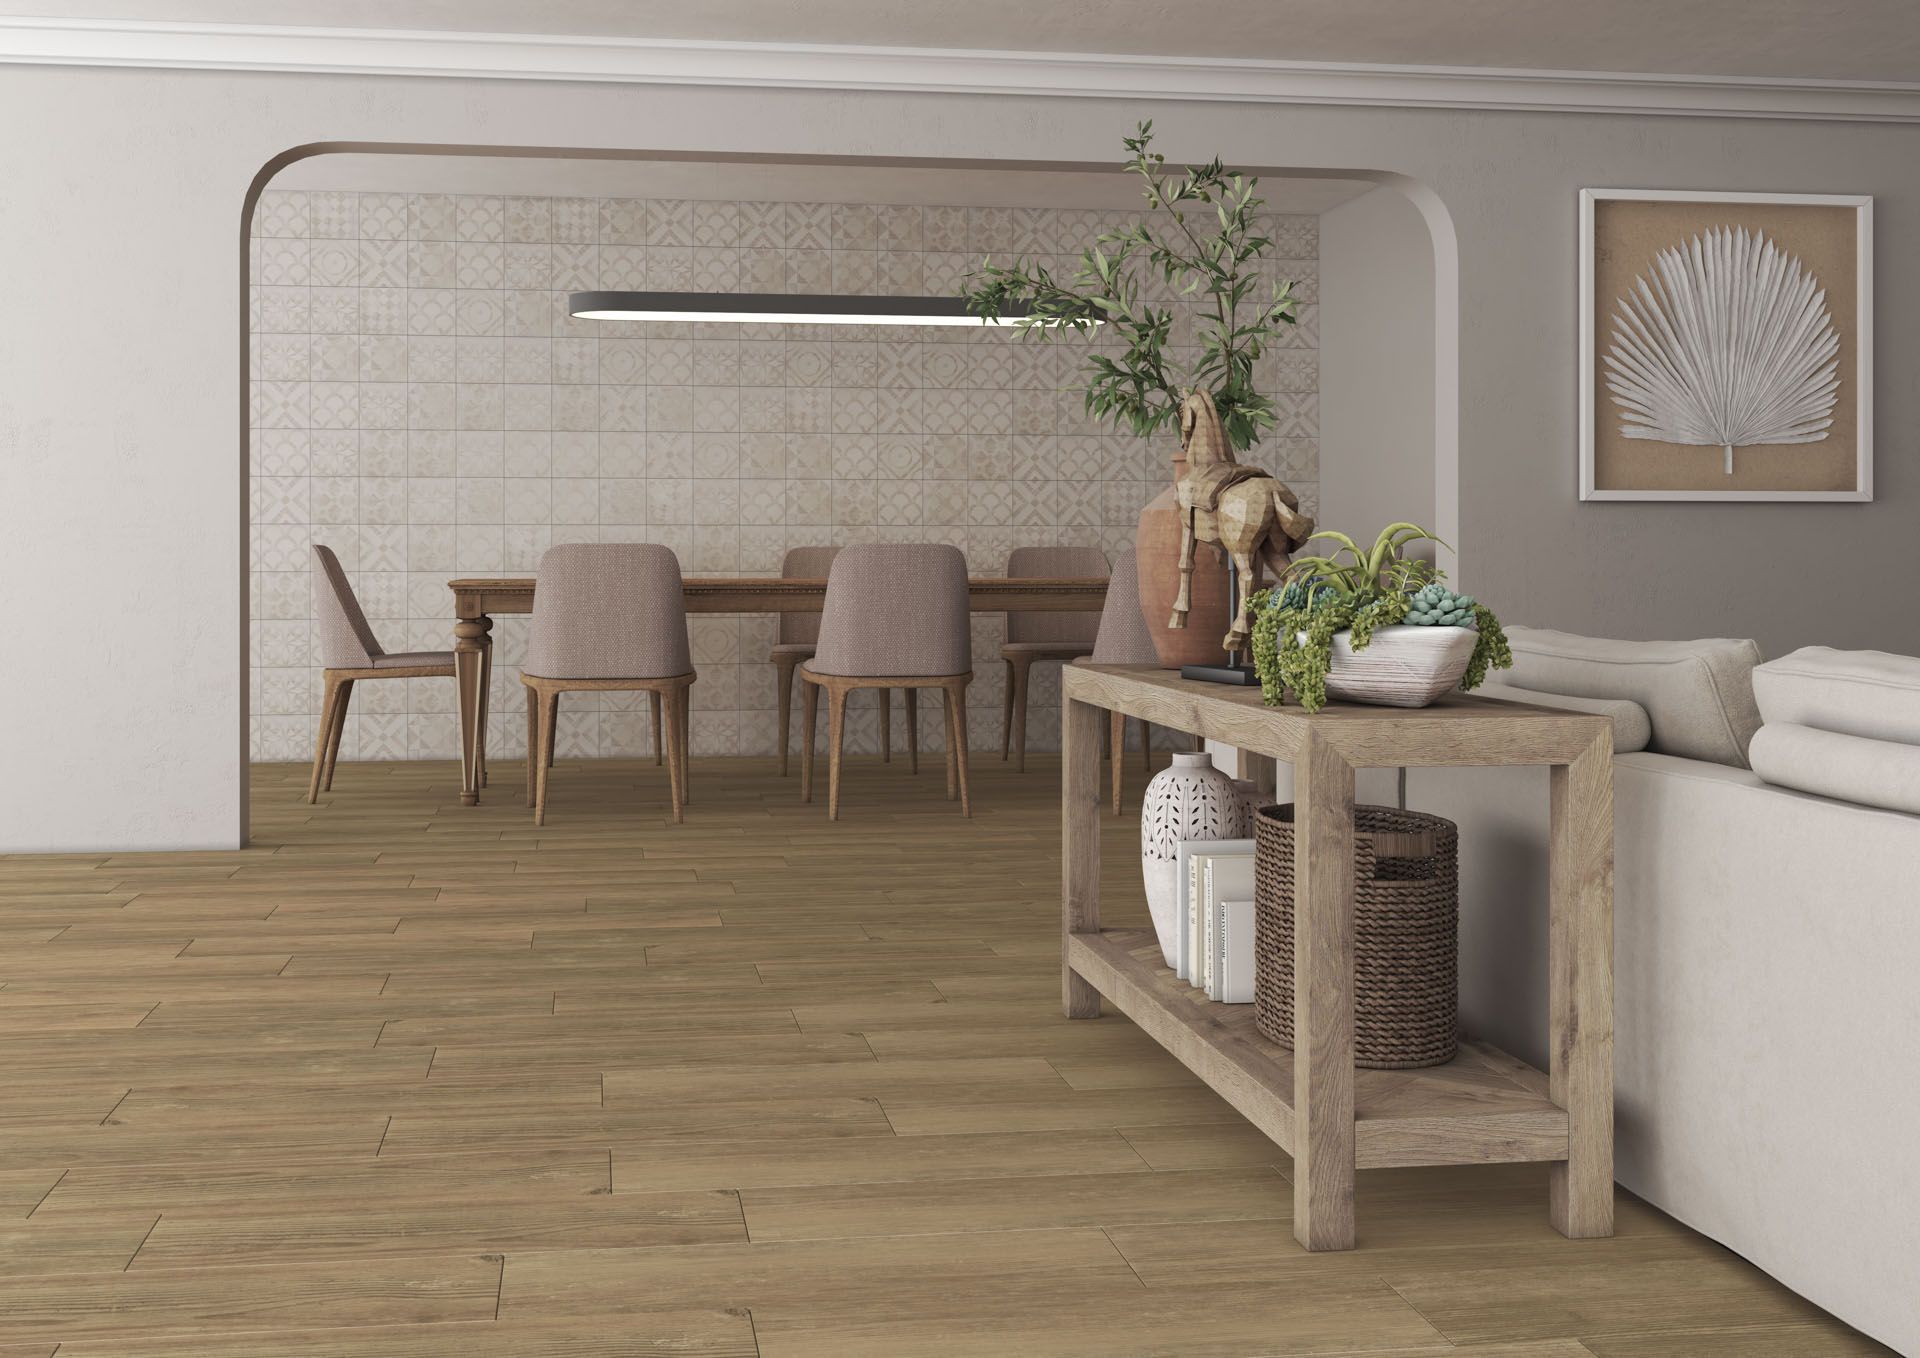 UPTILES - RENNES TIMBER TILES COLLECTION BY TAU CERAMICA